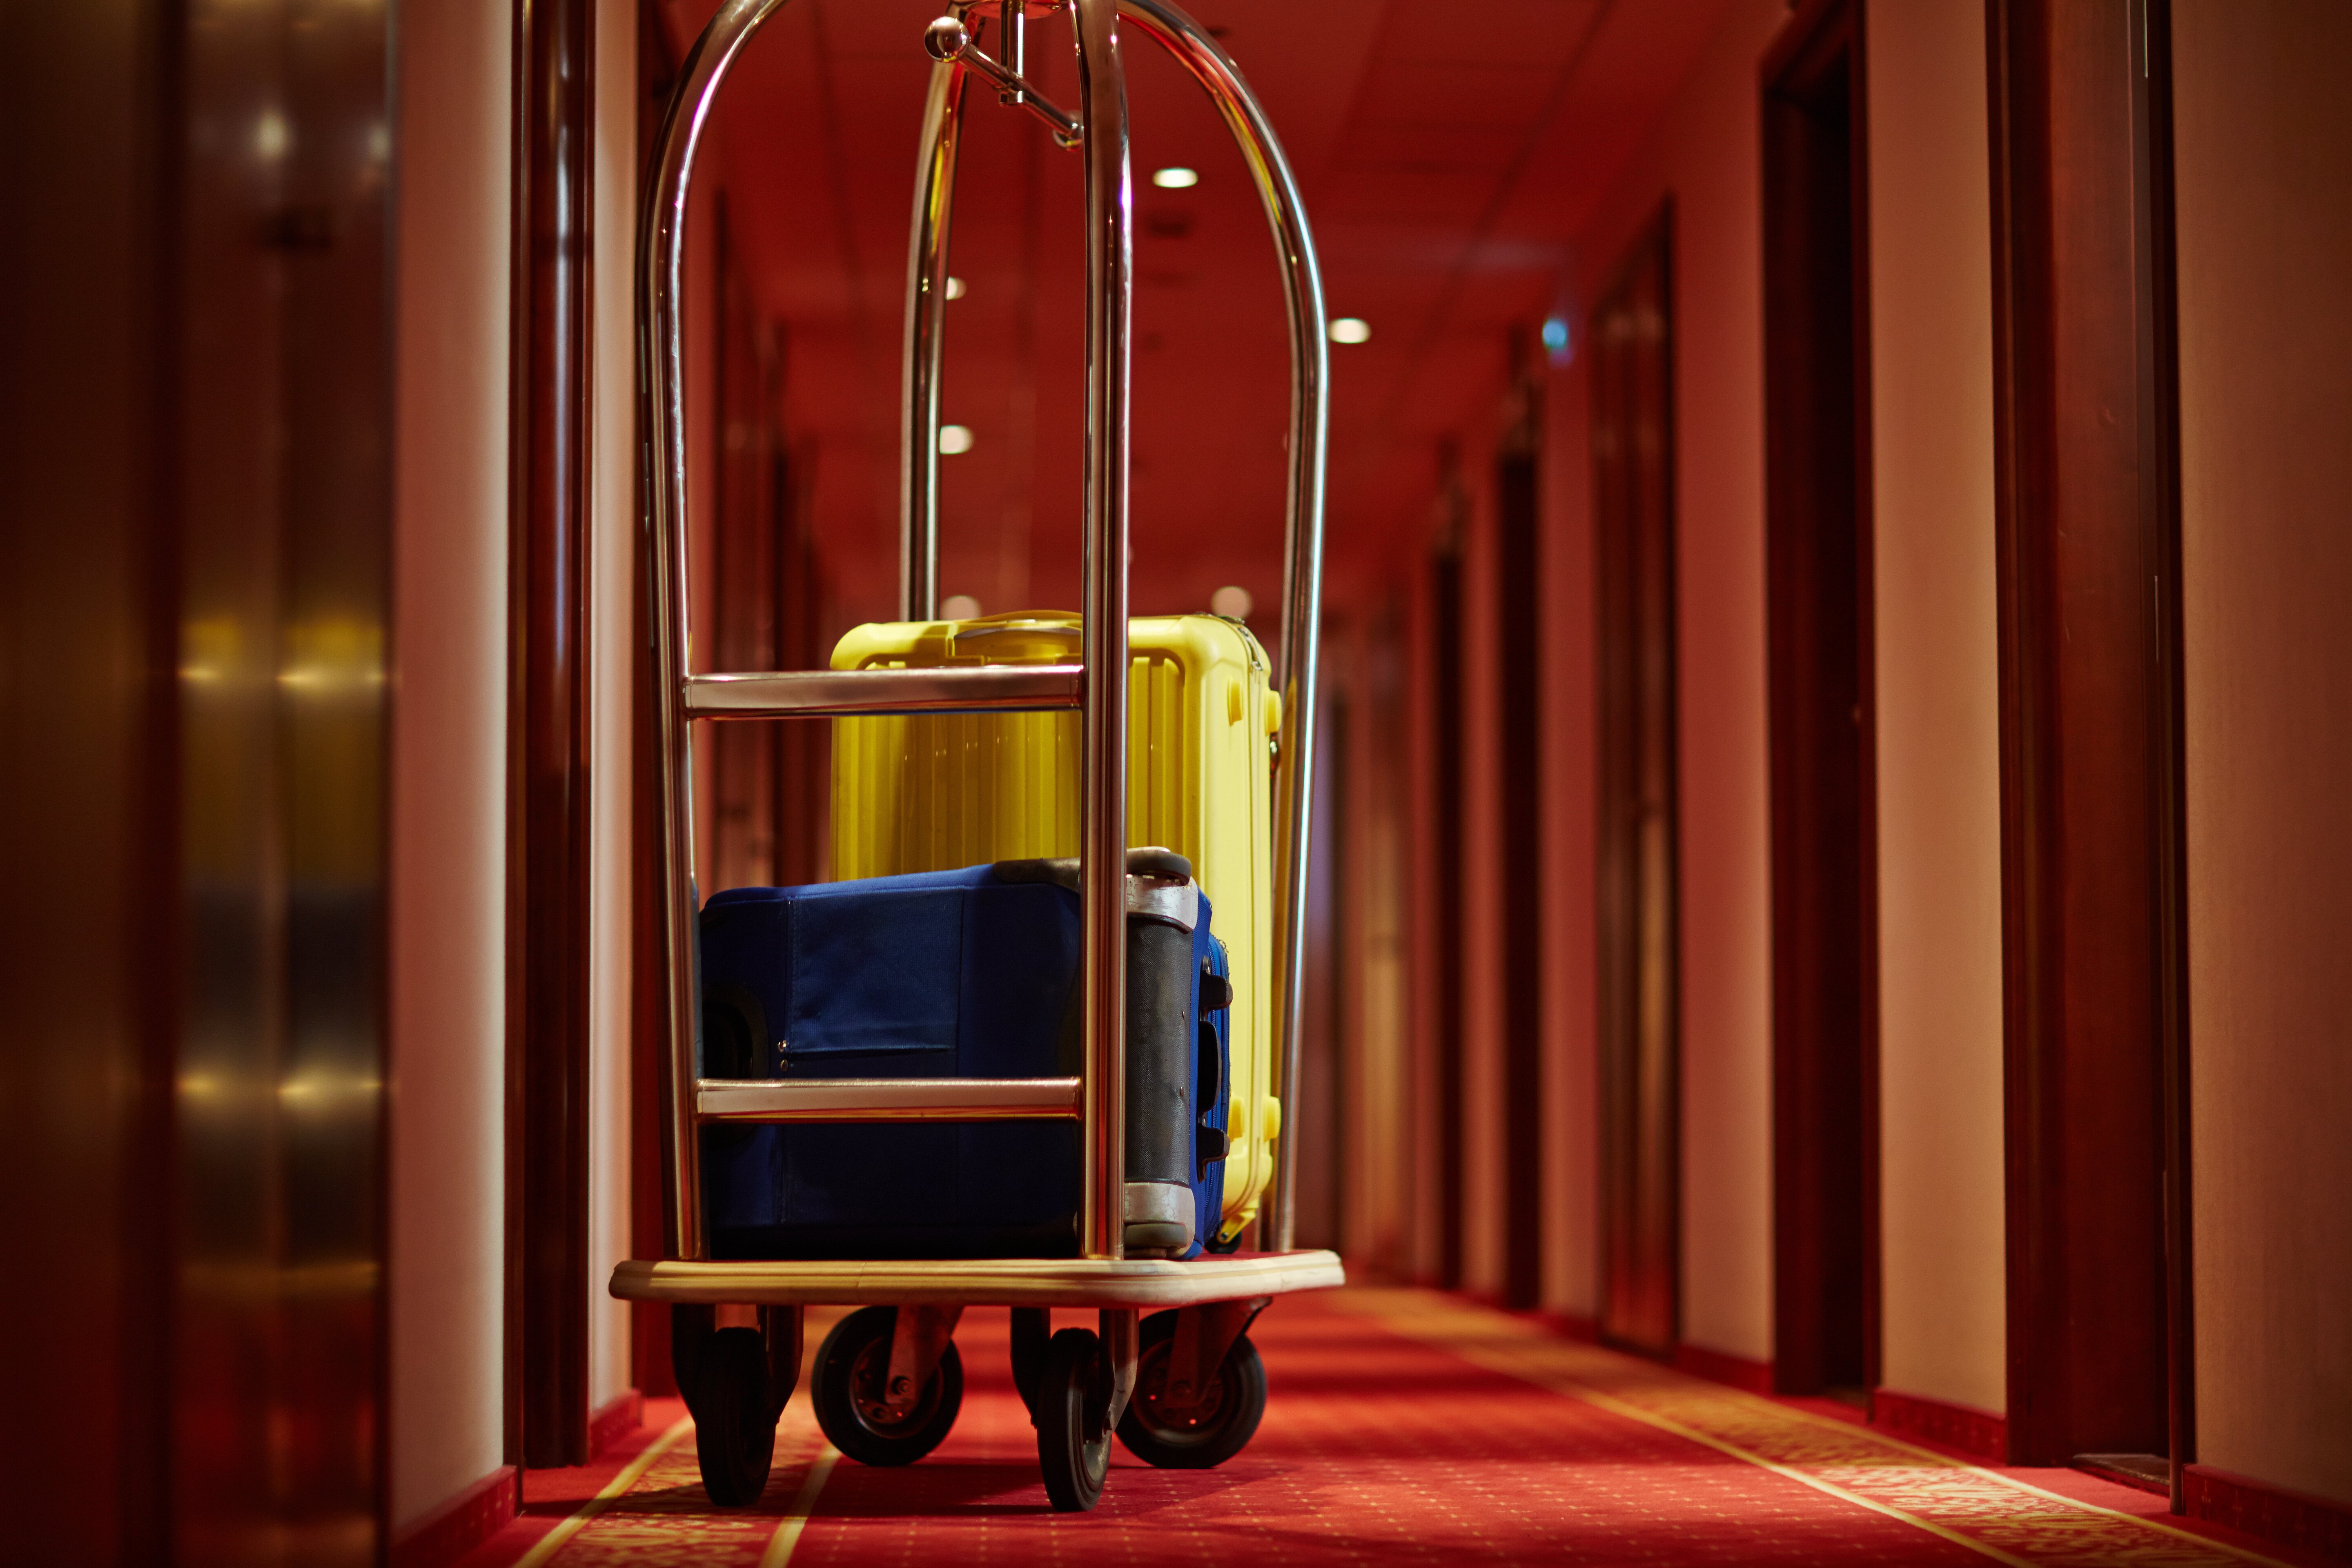 Hotels need urgent support with more insolvencies and job losses likely this year